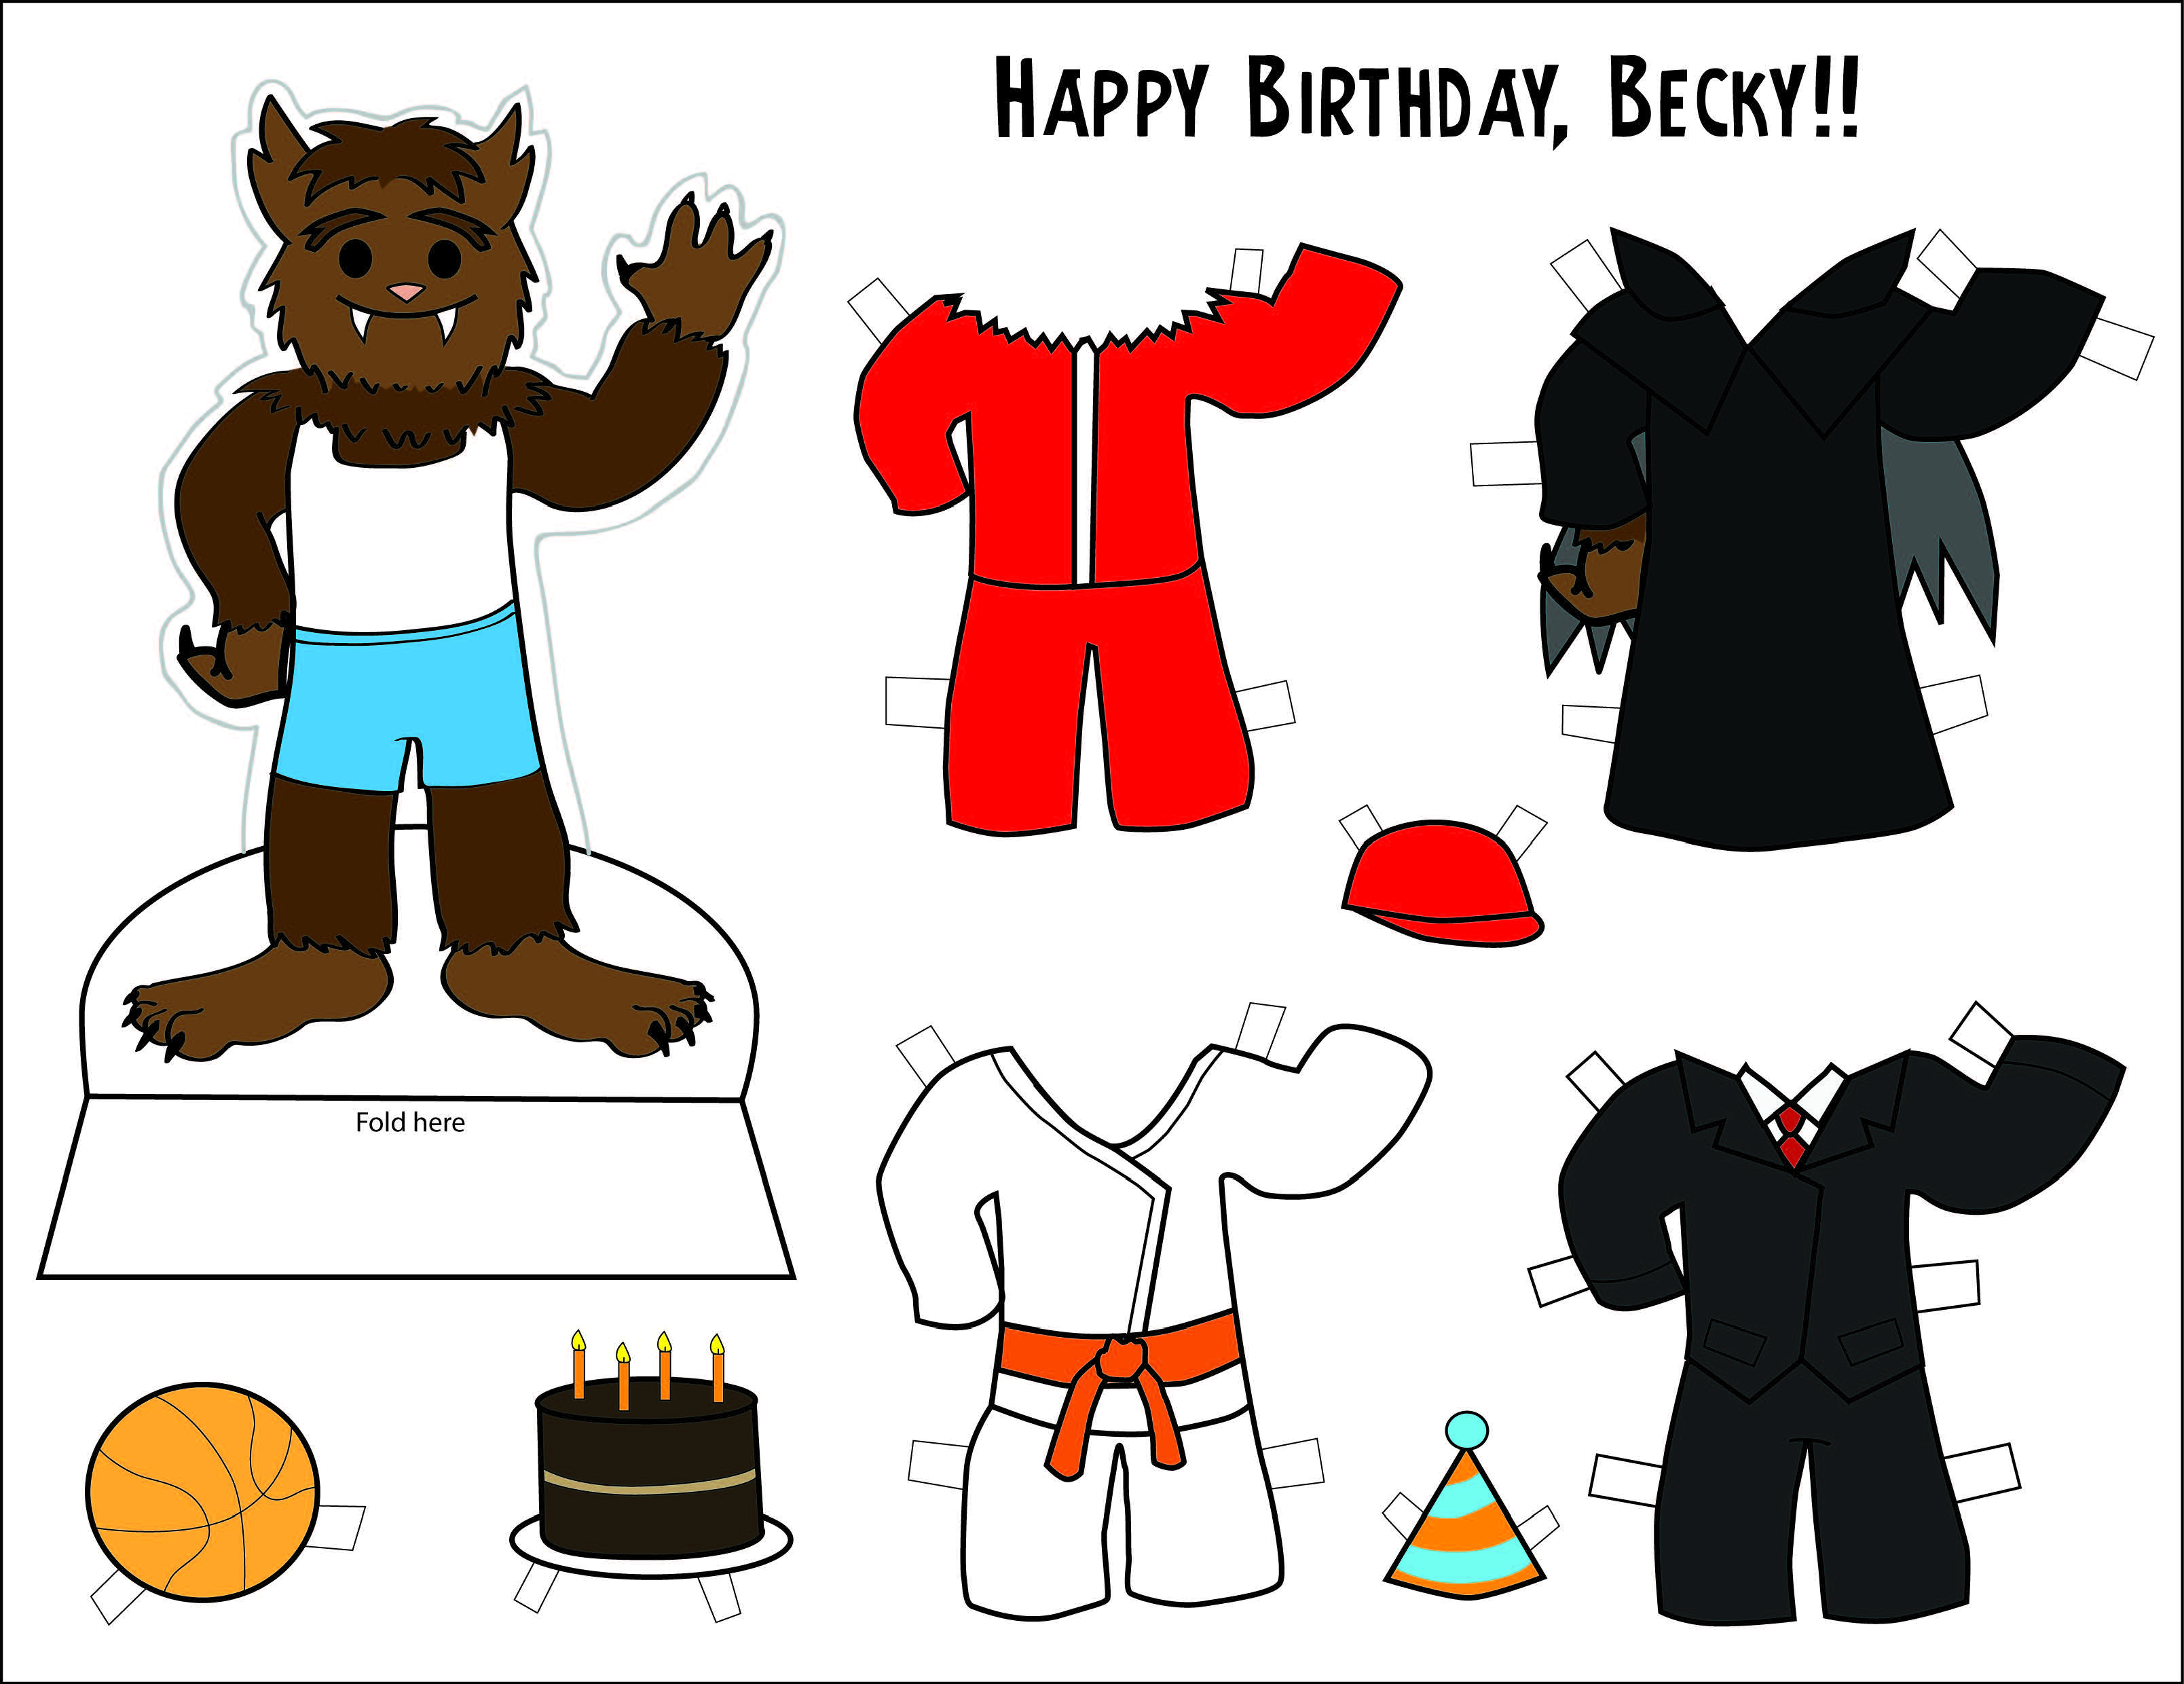 Art by Alina Pete consisting of a Wolfie paper doll and assorted fashions. The fashions include a red track suit, a Little Vampires robe with wings, a red baseball cap, a basketball, a birthday cake, a karate gi with a red belt, a party hat, and a business suit.